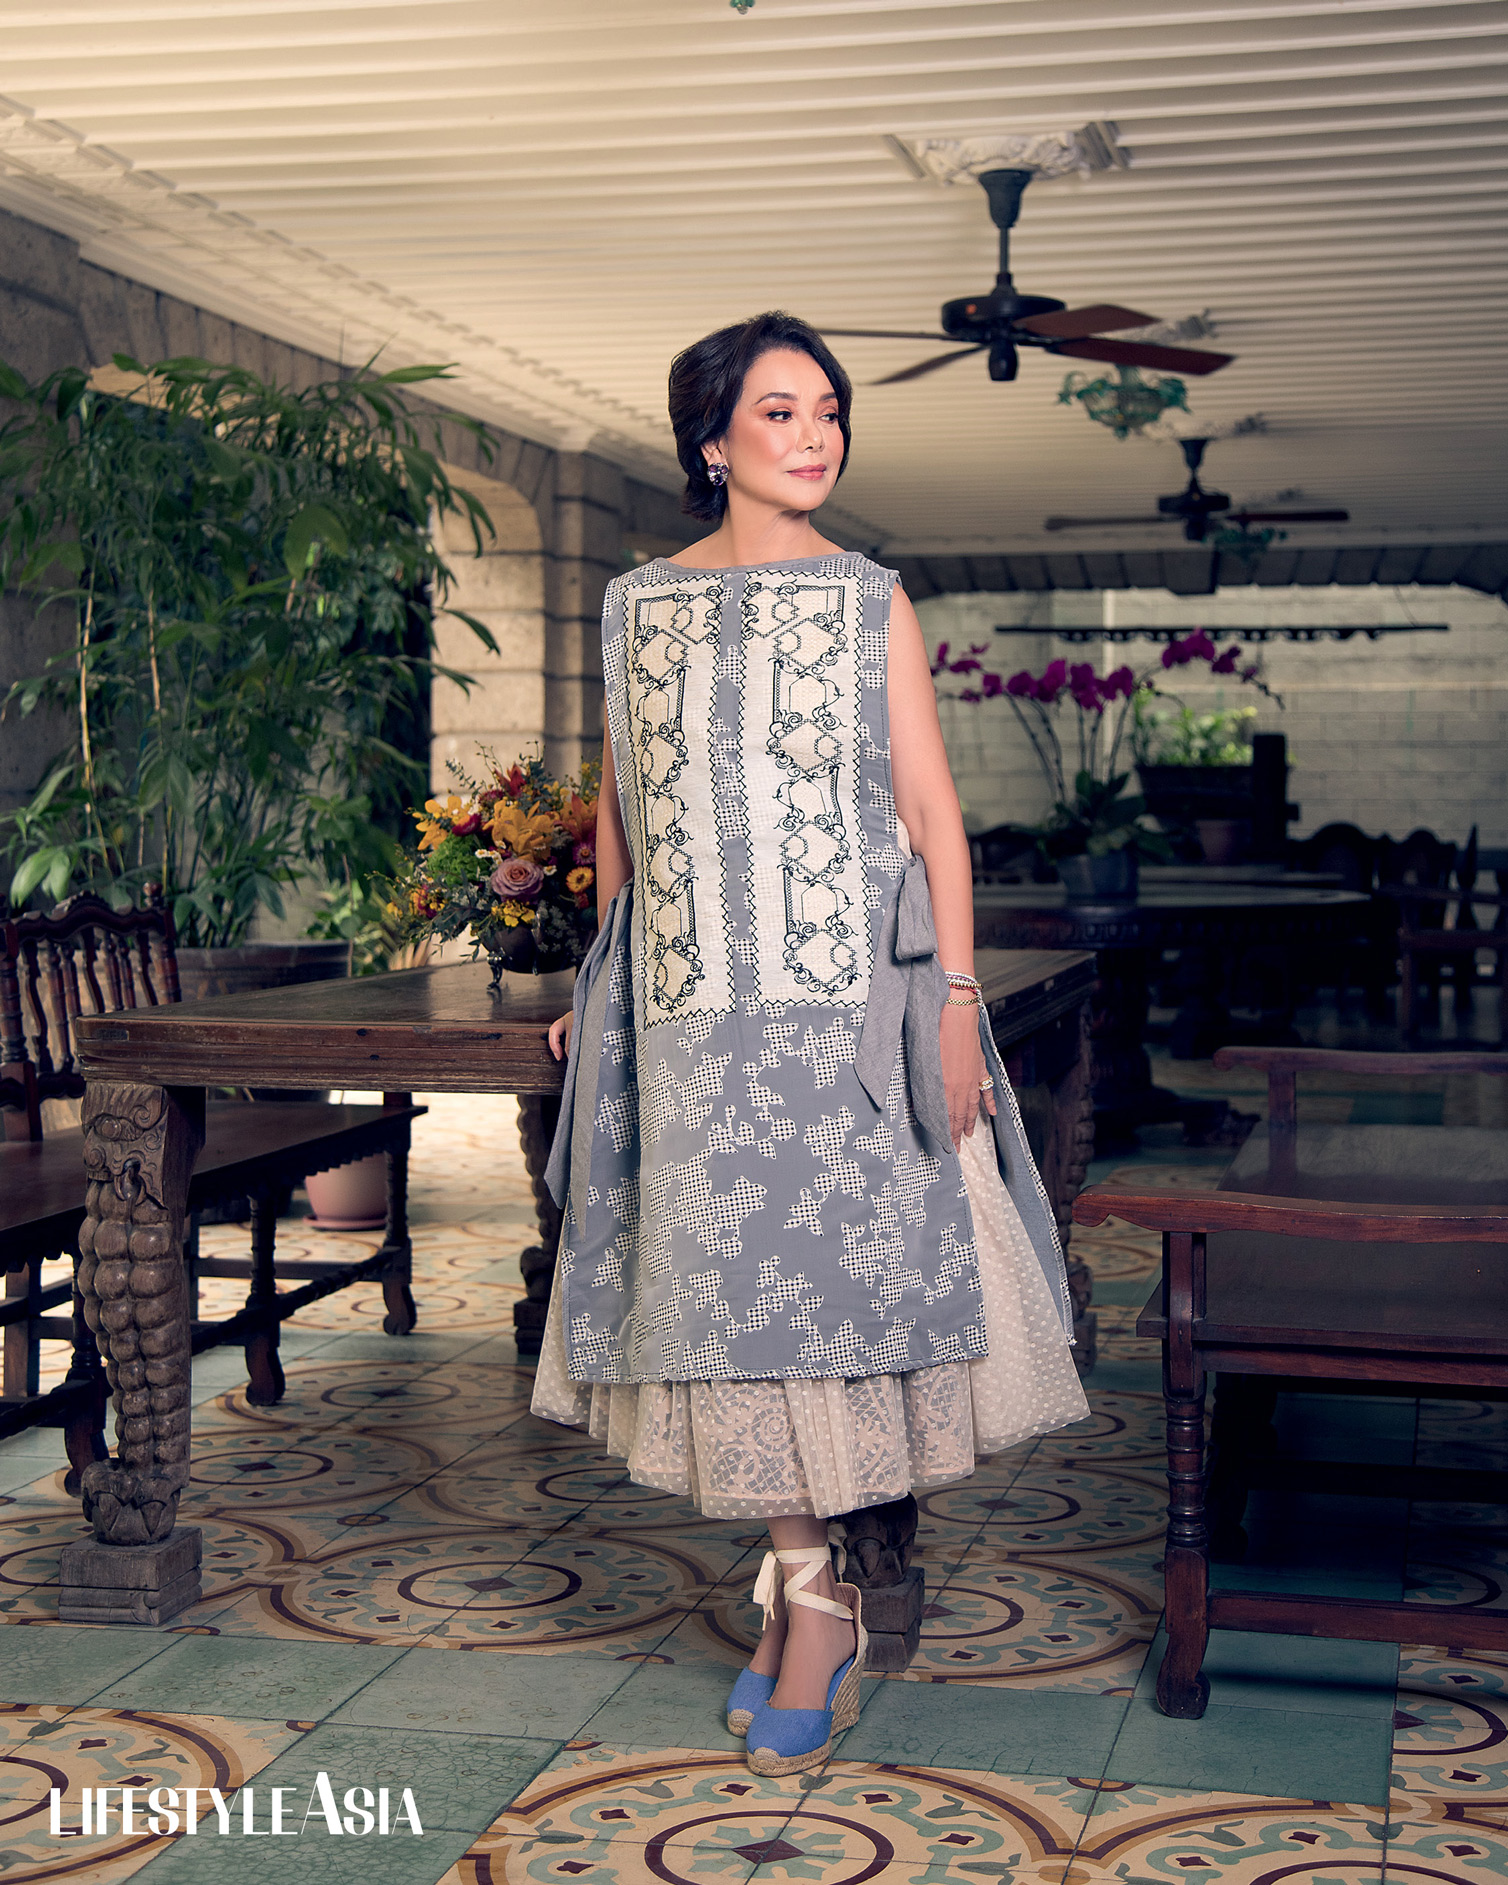 Gray embroidered apron dress and lace and tulle skirt, JOR-EL ESPINA; Multicolored gemstone earrings, JMA JEWELRY.